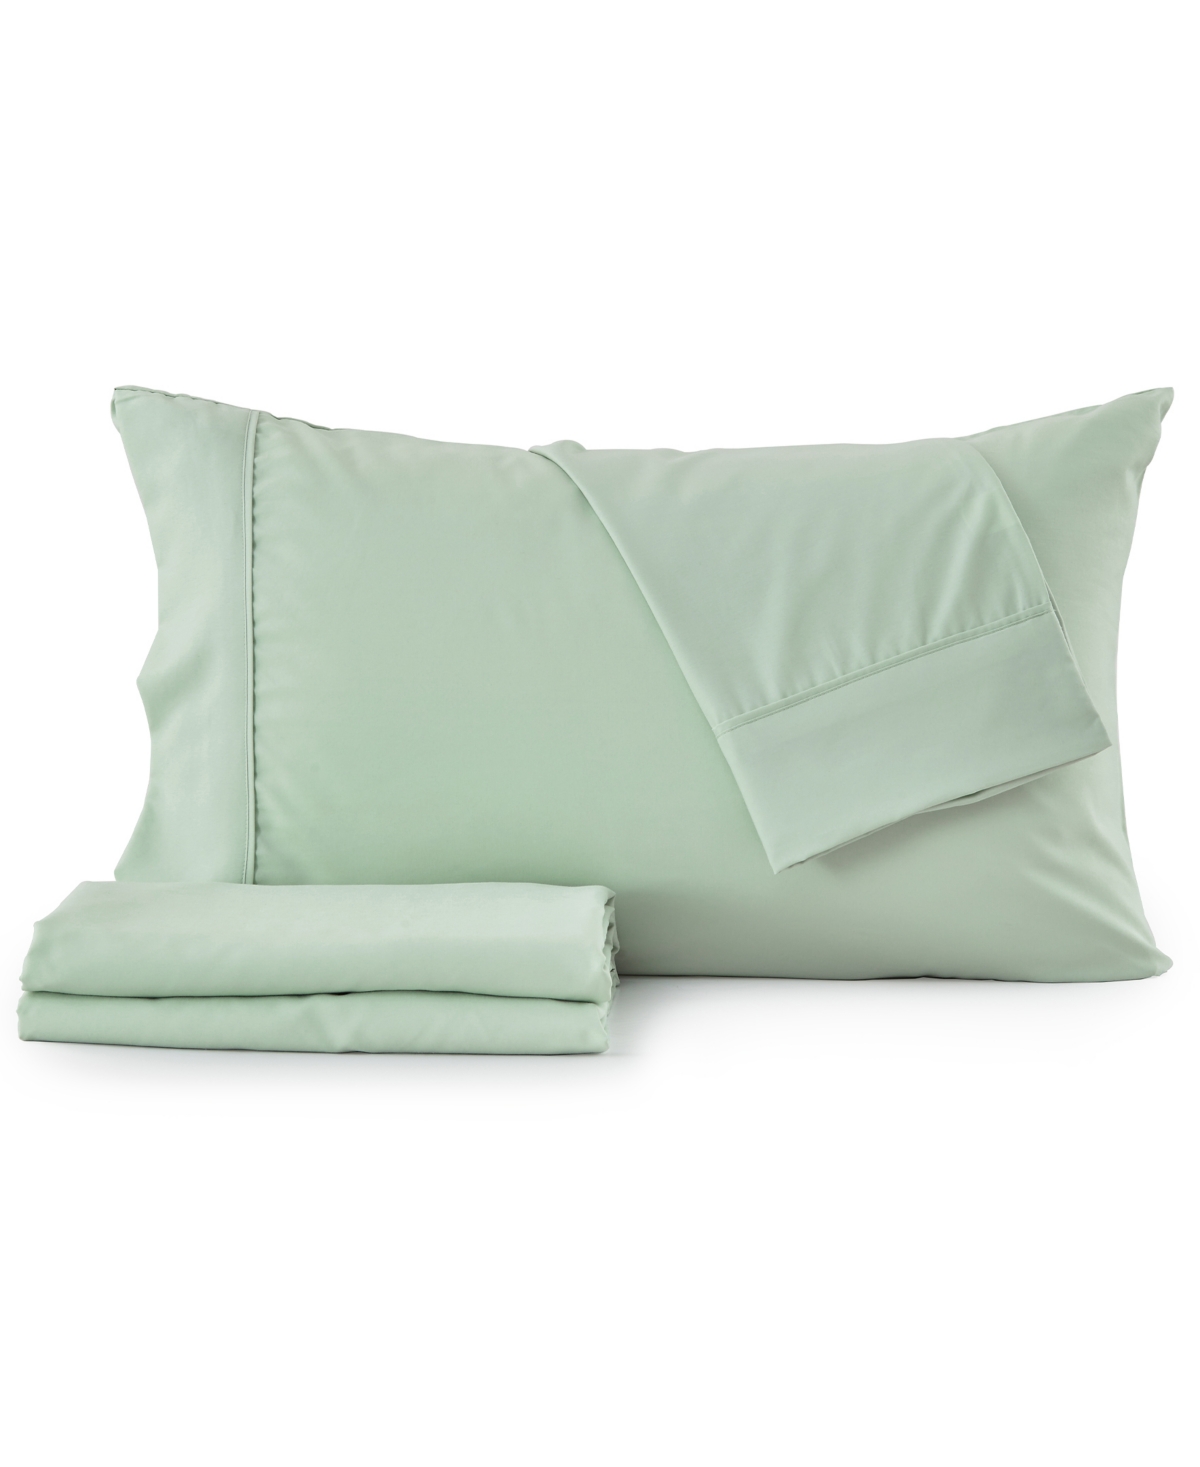 Premium Comforts Rayon From Bamboo Blend Crease-resistant 4 Piece Sheet Set, Full In Sage